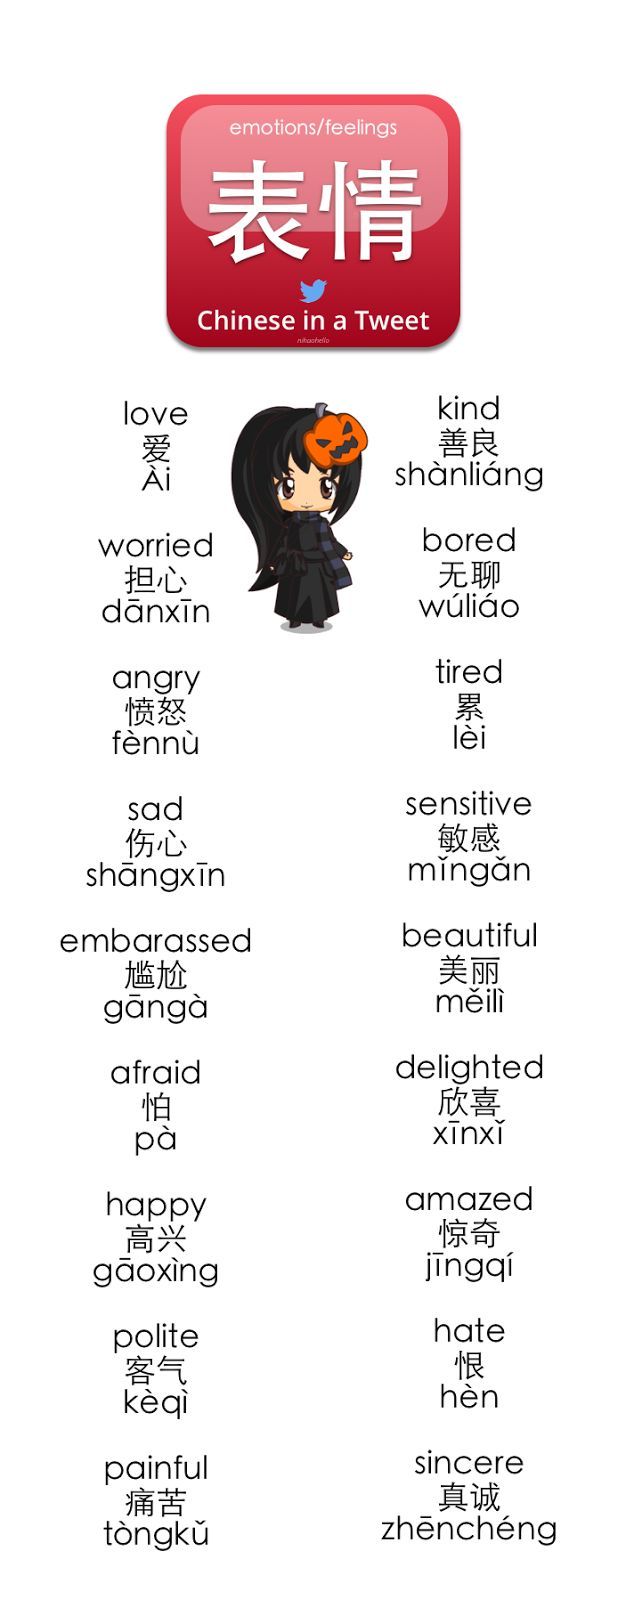 Chinese Vocabulary for Emotions/Feelings #learnchinese